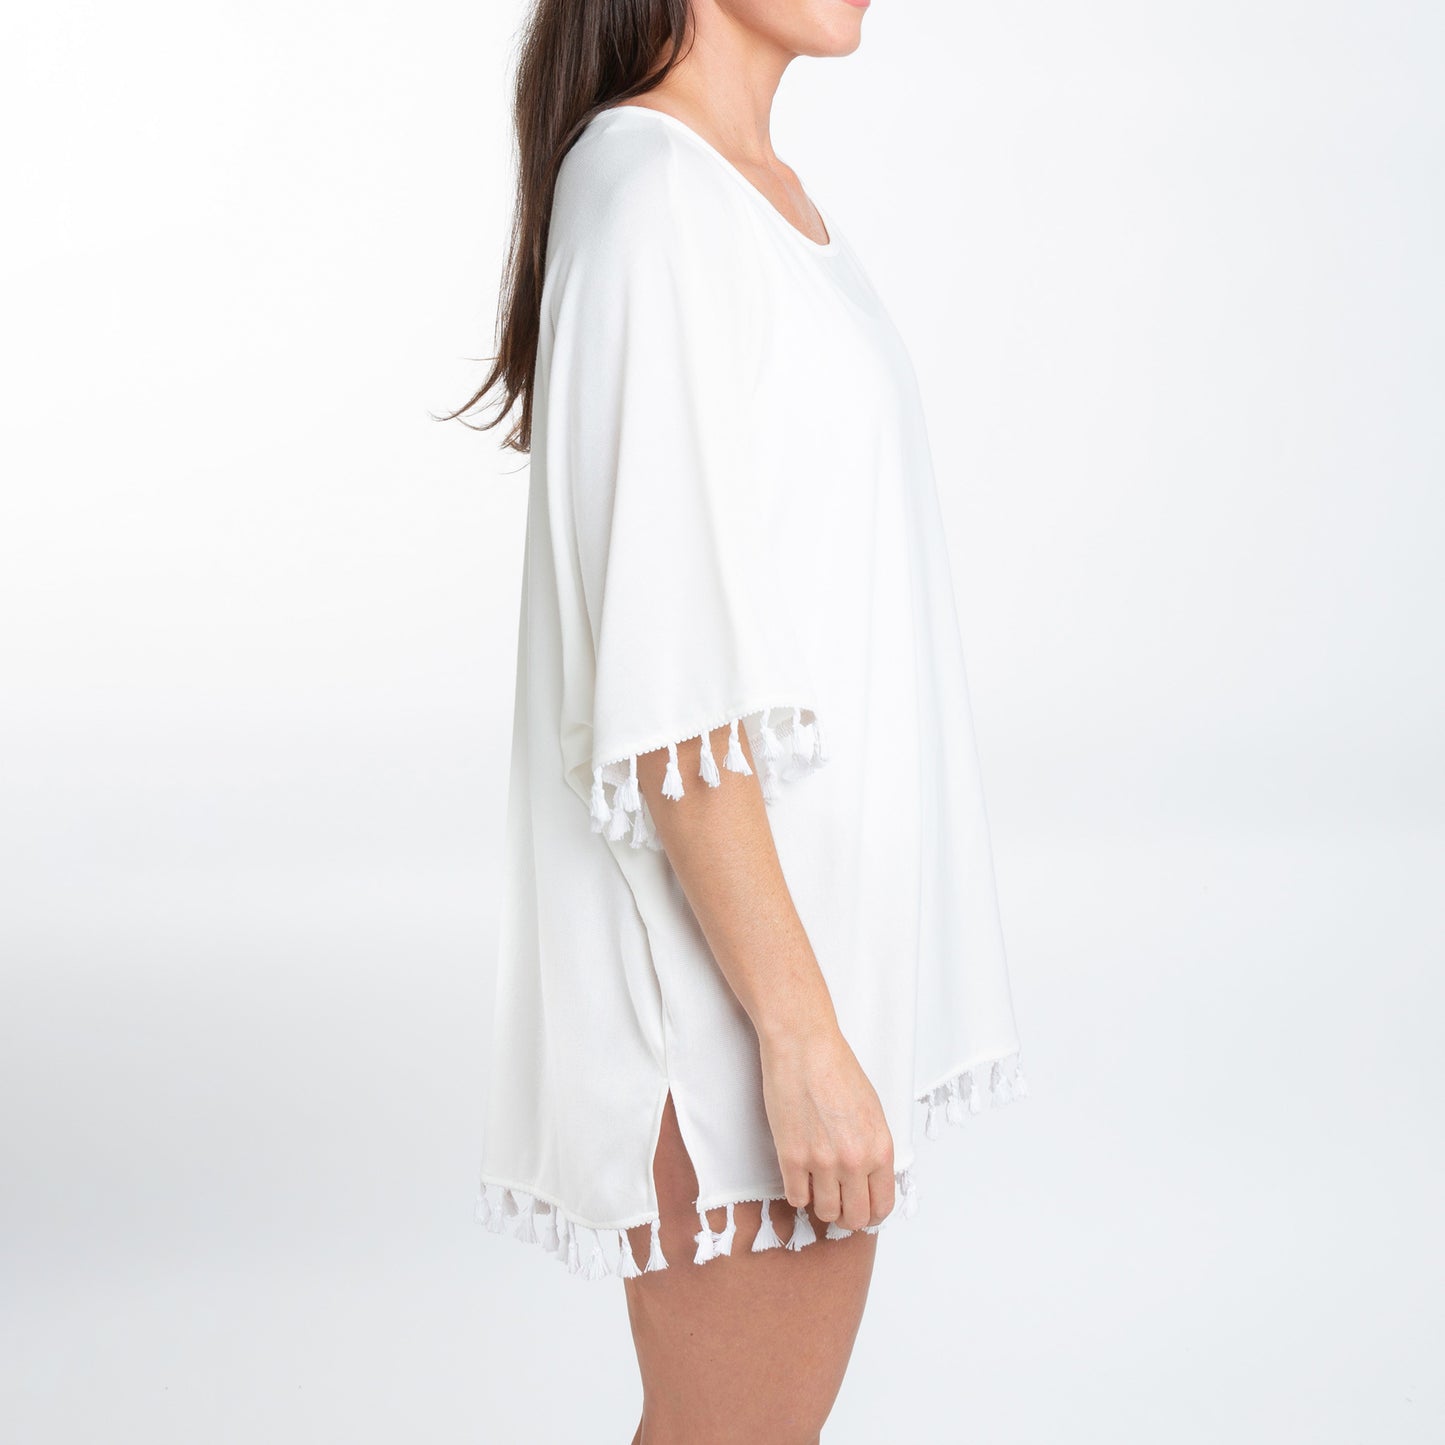 Elsie White Jersey One Size Beach Swimsuit Cover Up